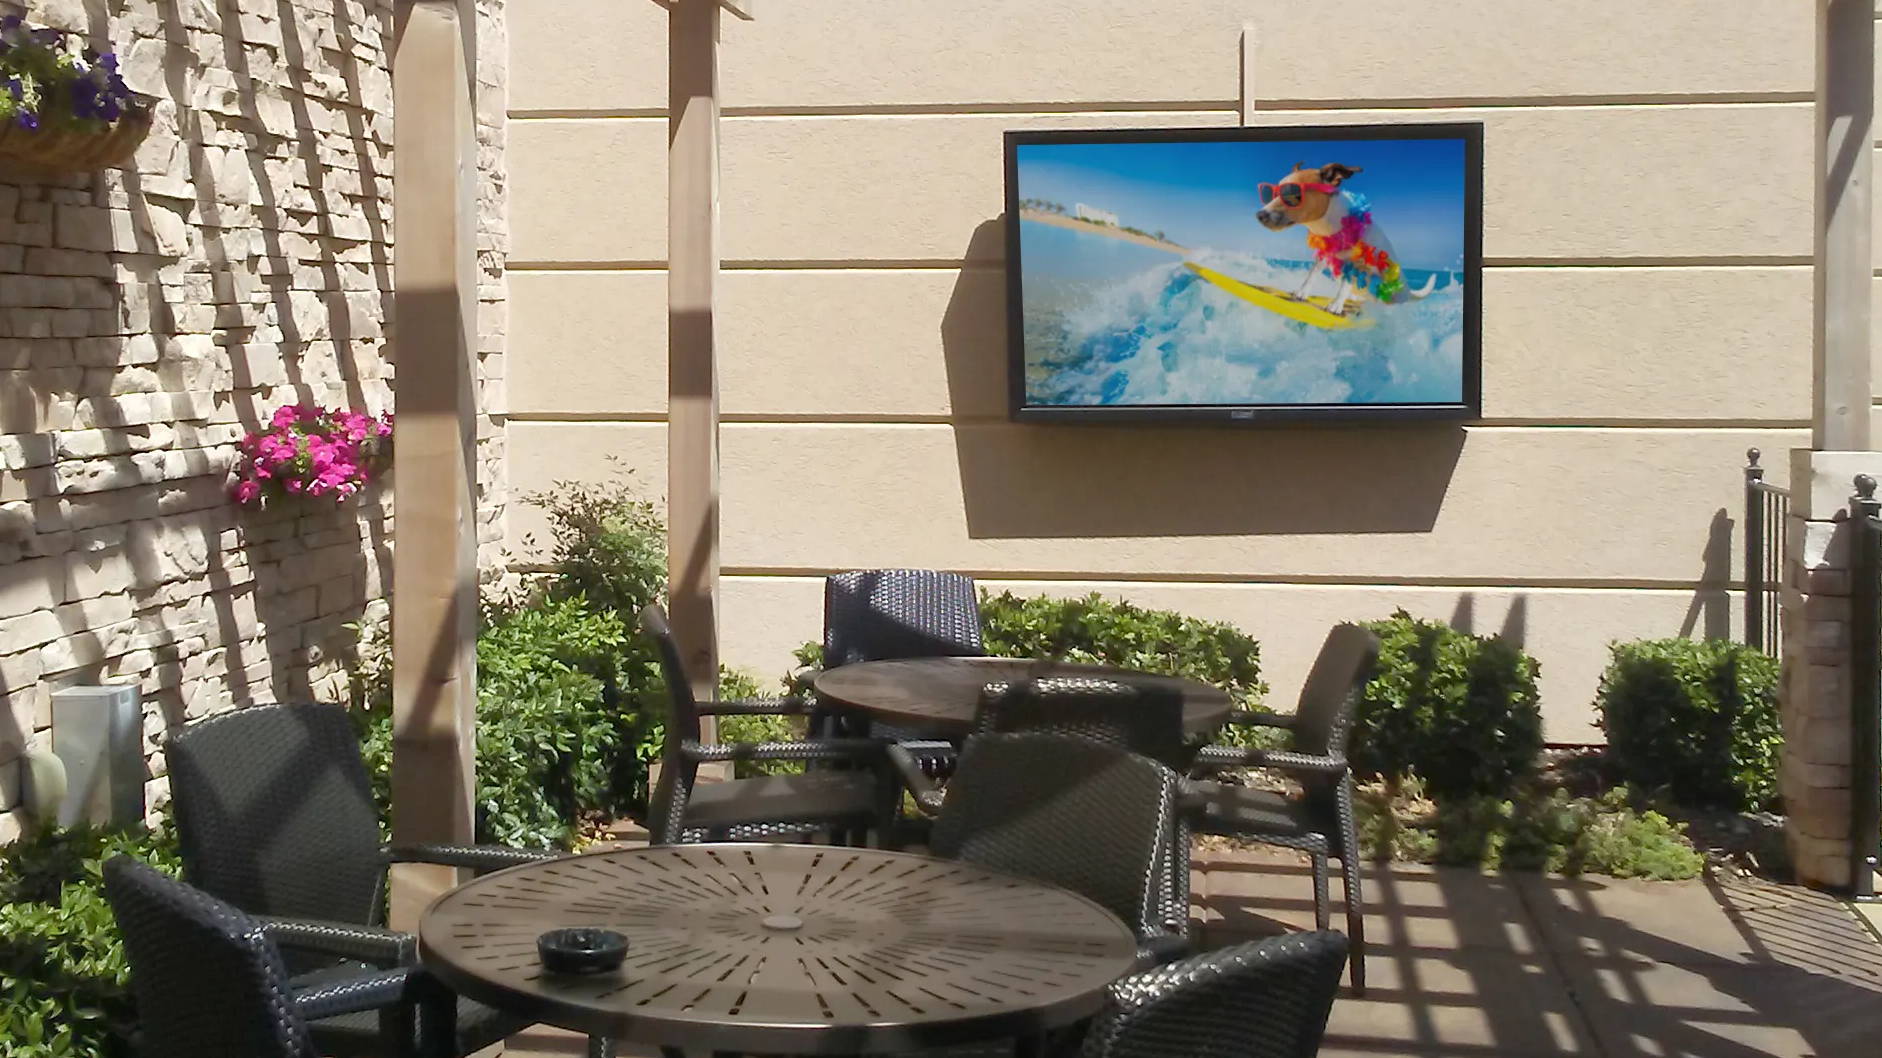 The TV shield TV for patio